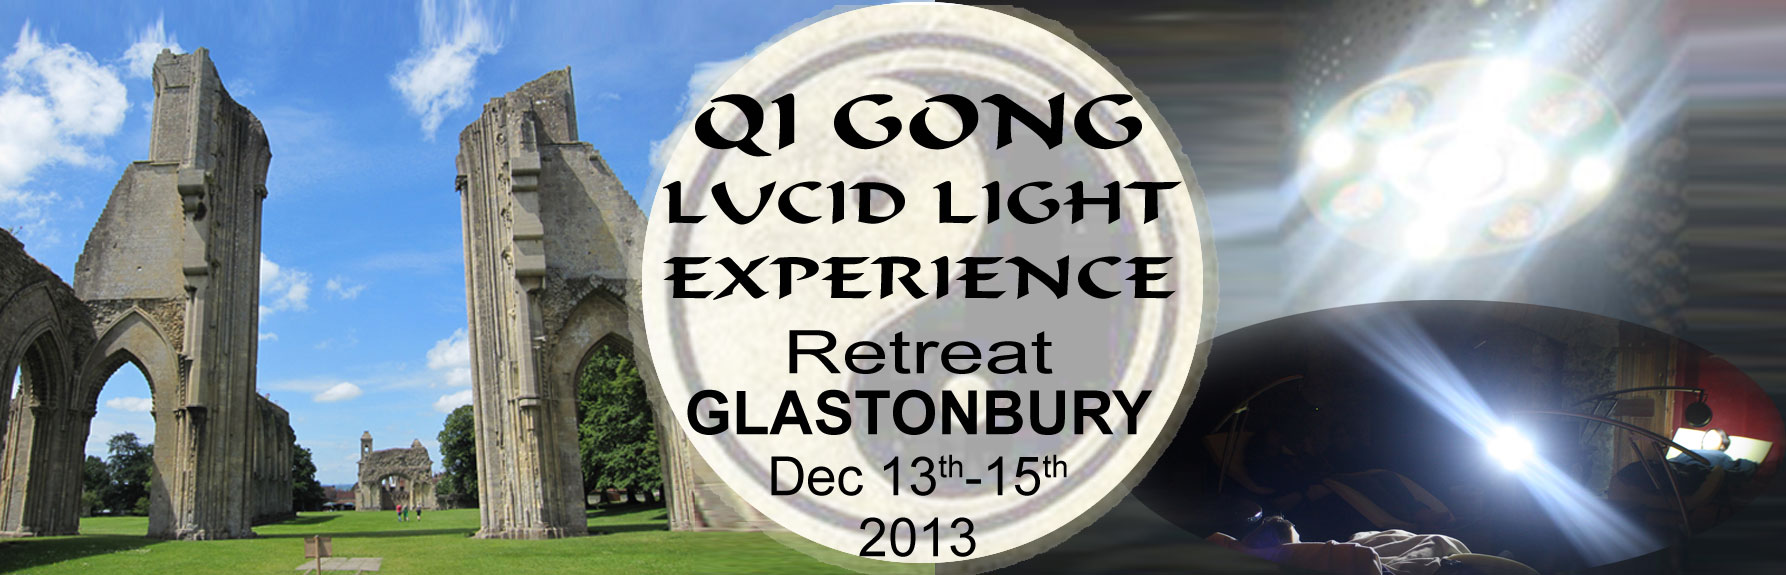 GLASTONBURY QI GONG & LUCID LIGHT EXPERIENCE RETREAT 13th - 15th December 2013